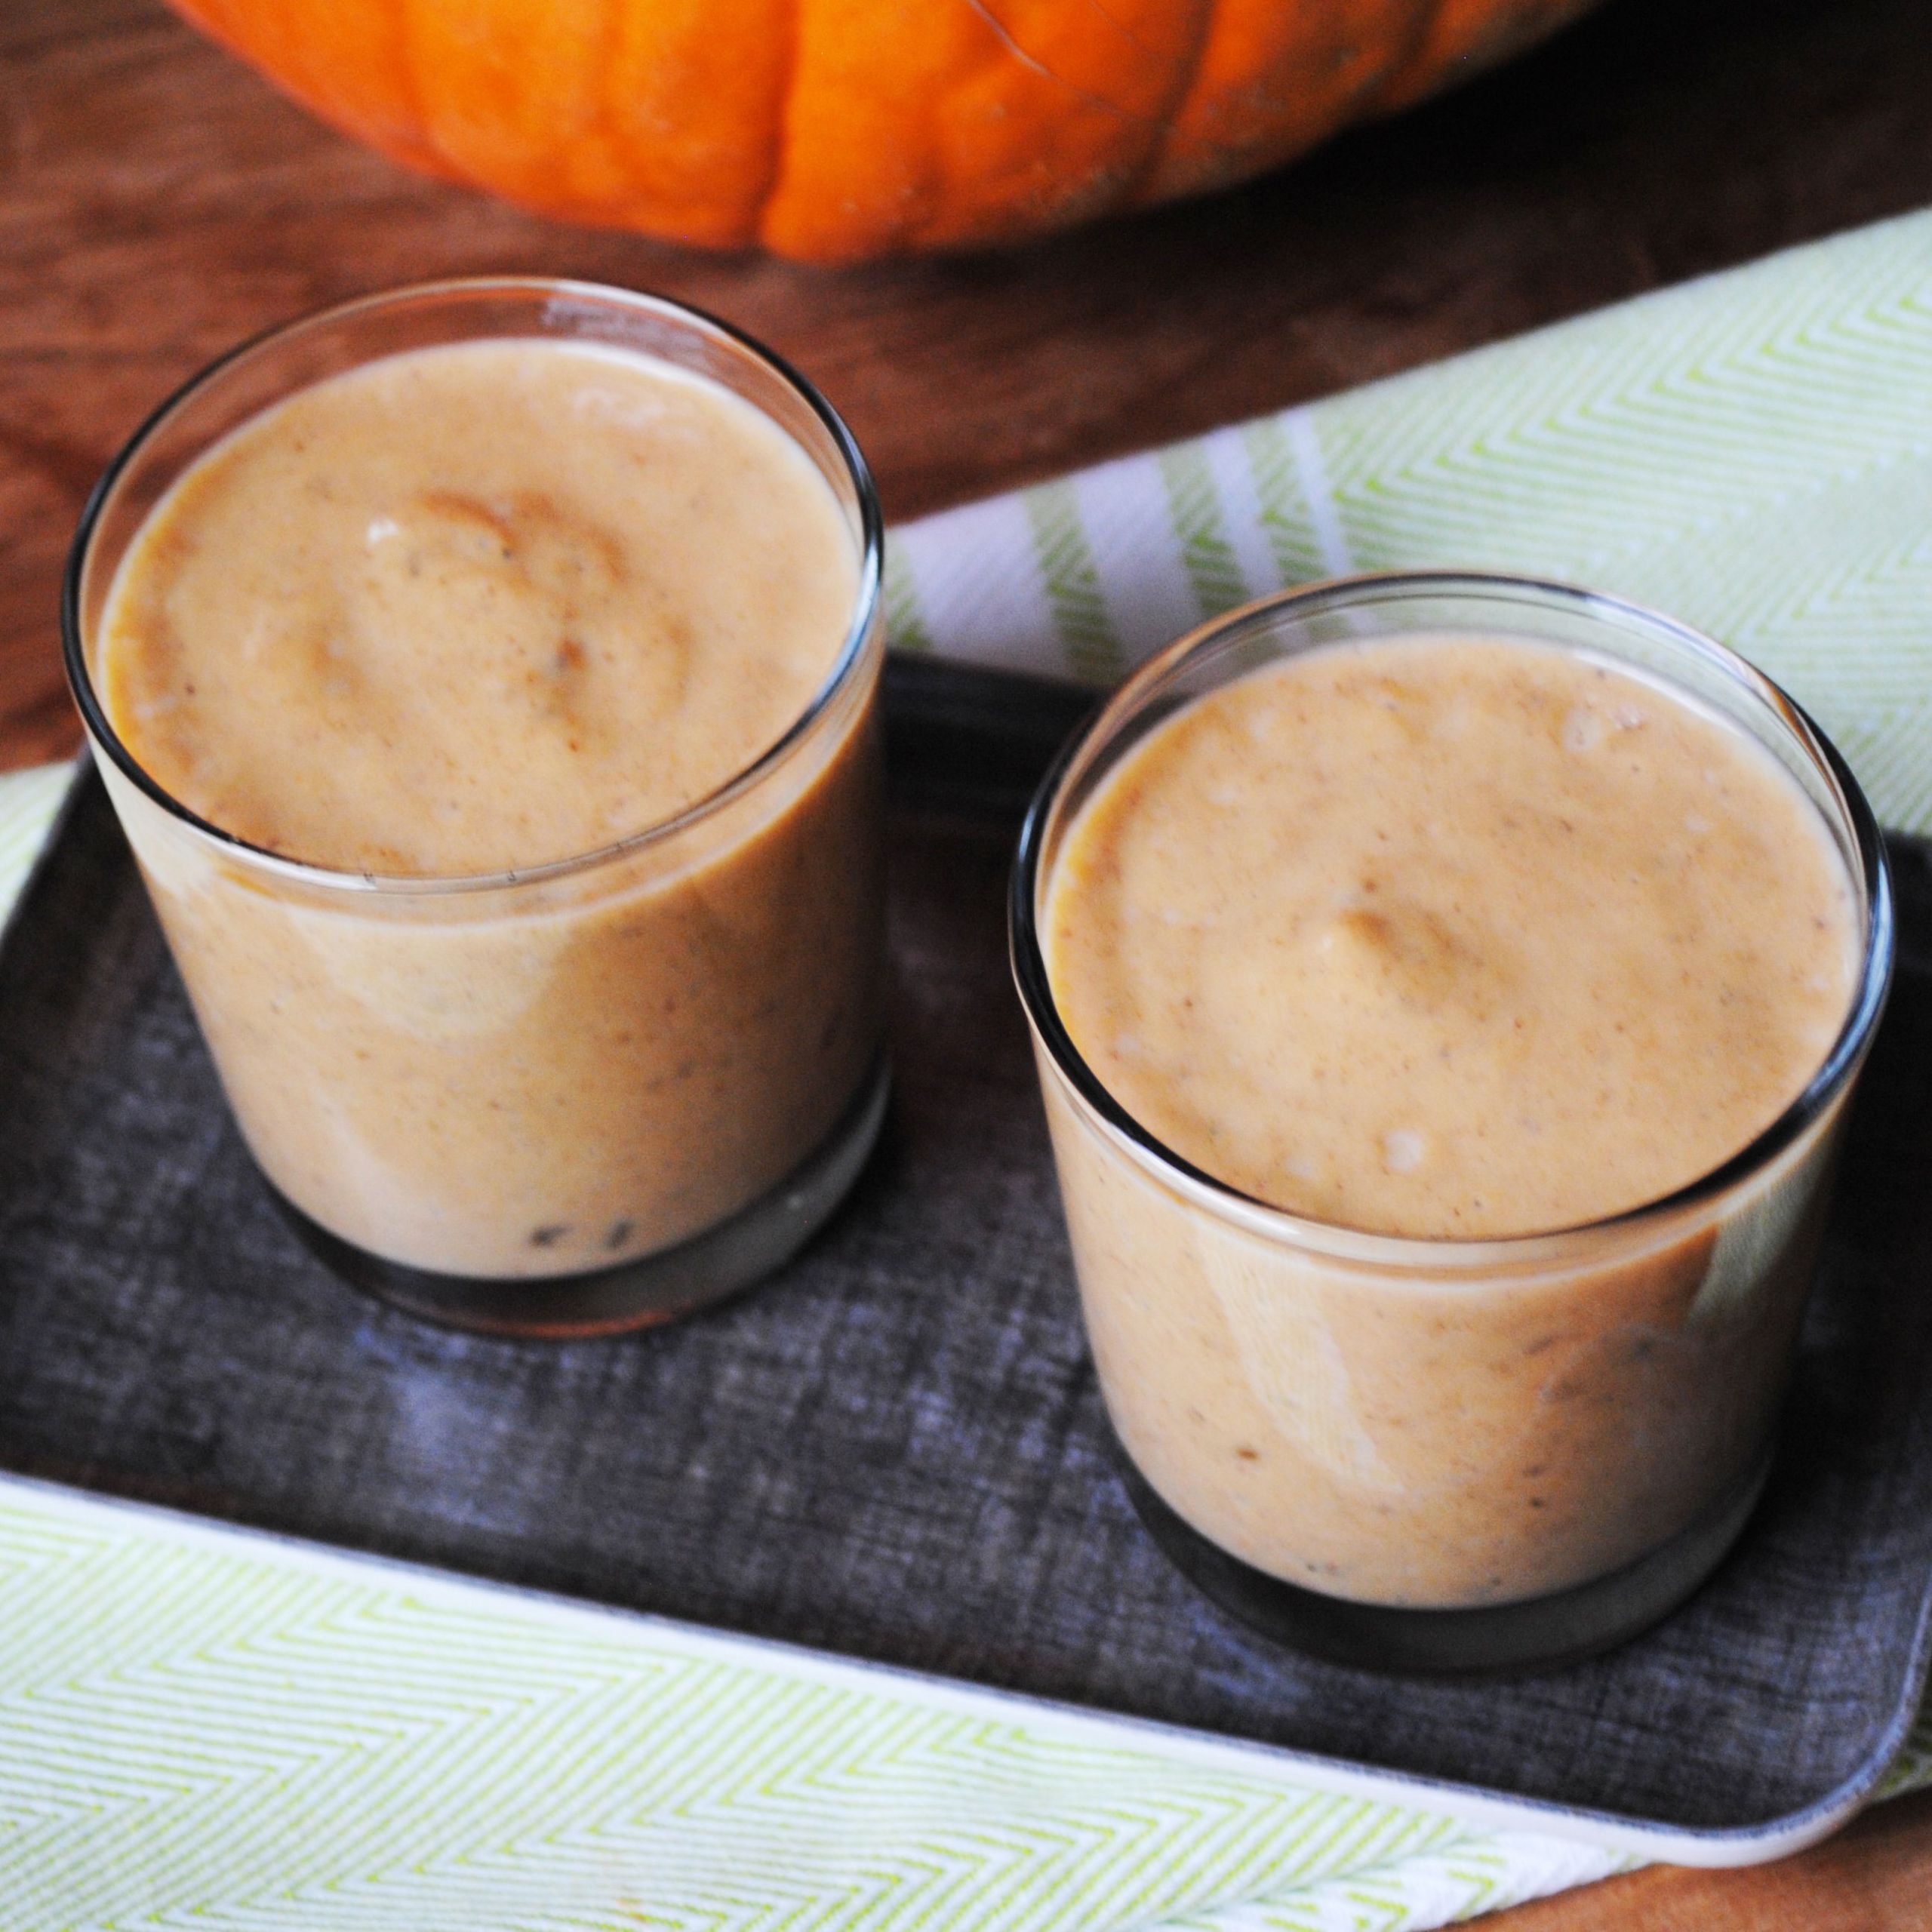 Pumpkin Puree Recipes Healthy
 Try These Genius Pumpkin Puree Recipes for Healthy